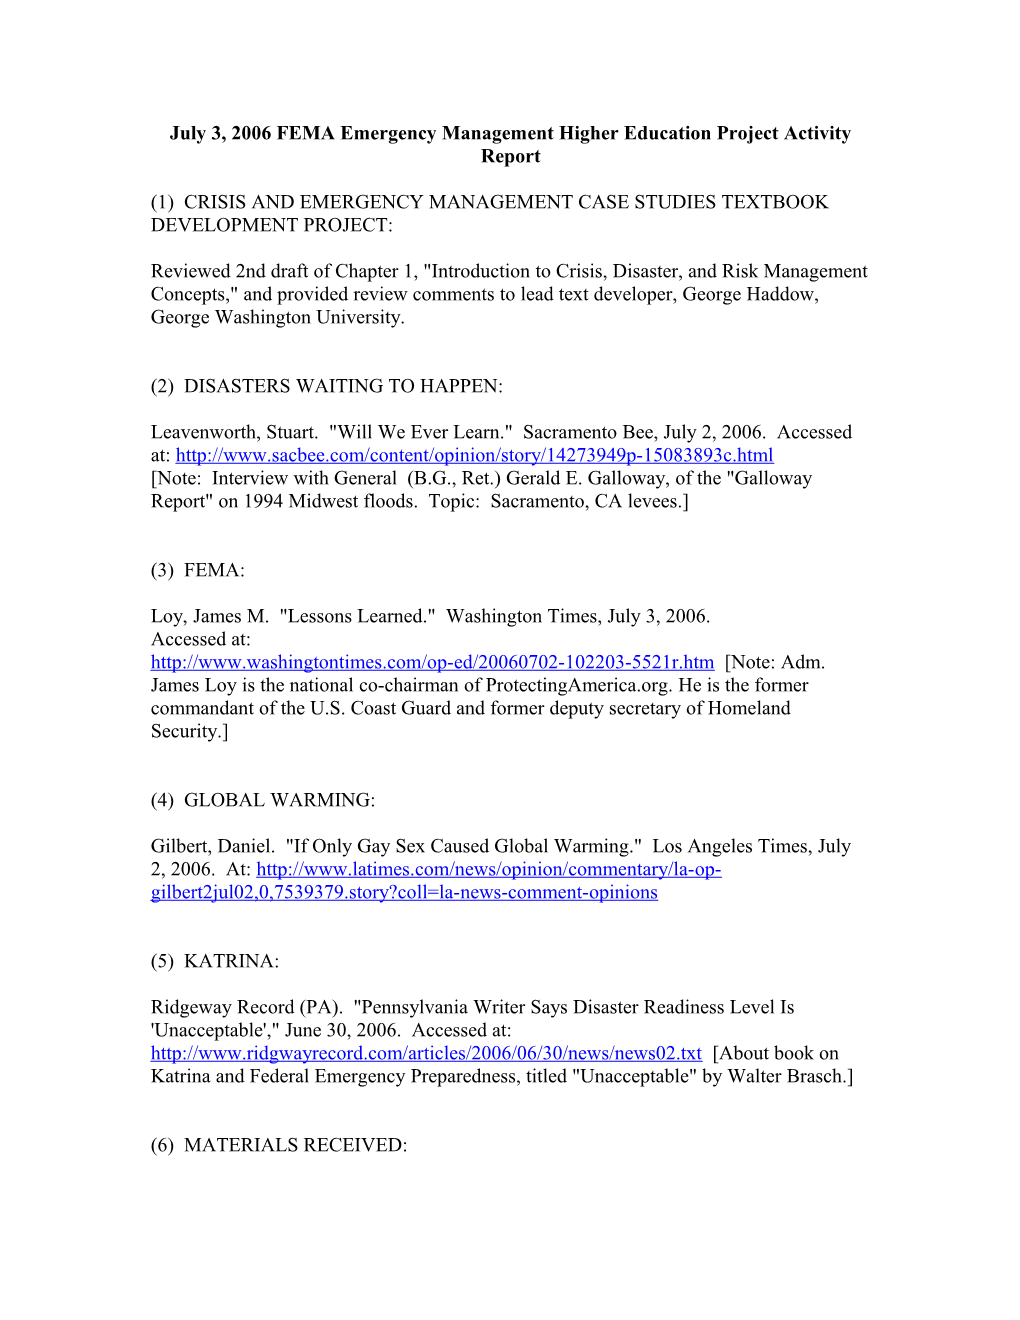 July 3, 2006 FEMA Emergency Management Higher Education Project Activity Report